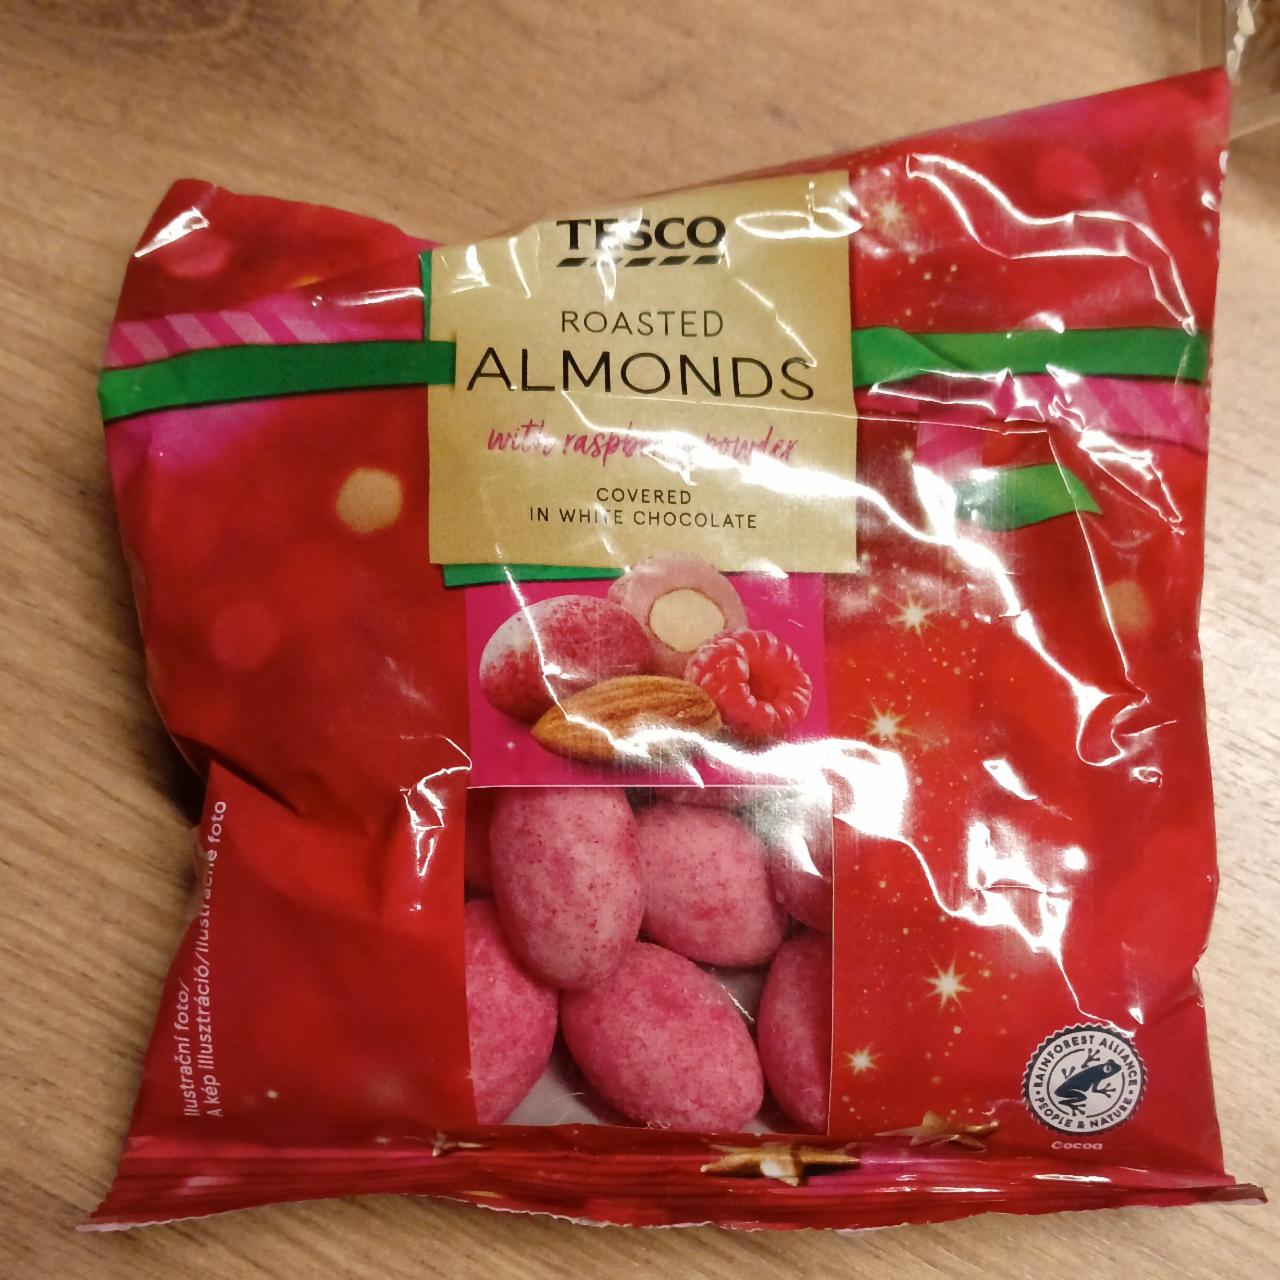 Fotografie - Roasted almonds with raspberry powder covered in white chocolate Tesco